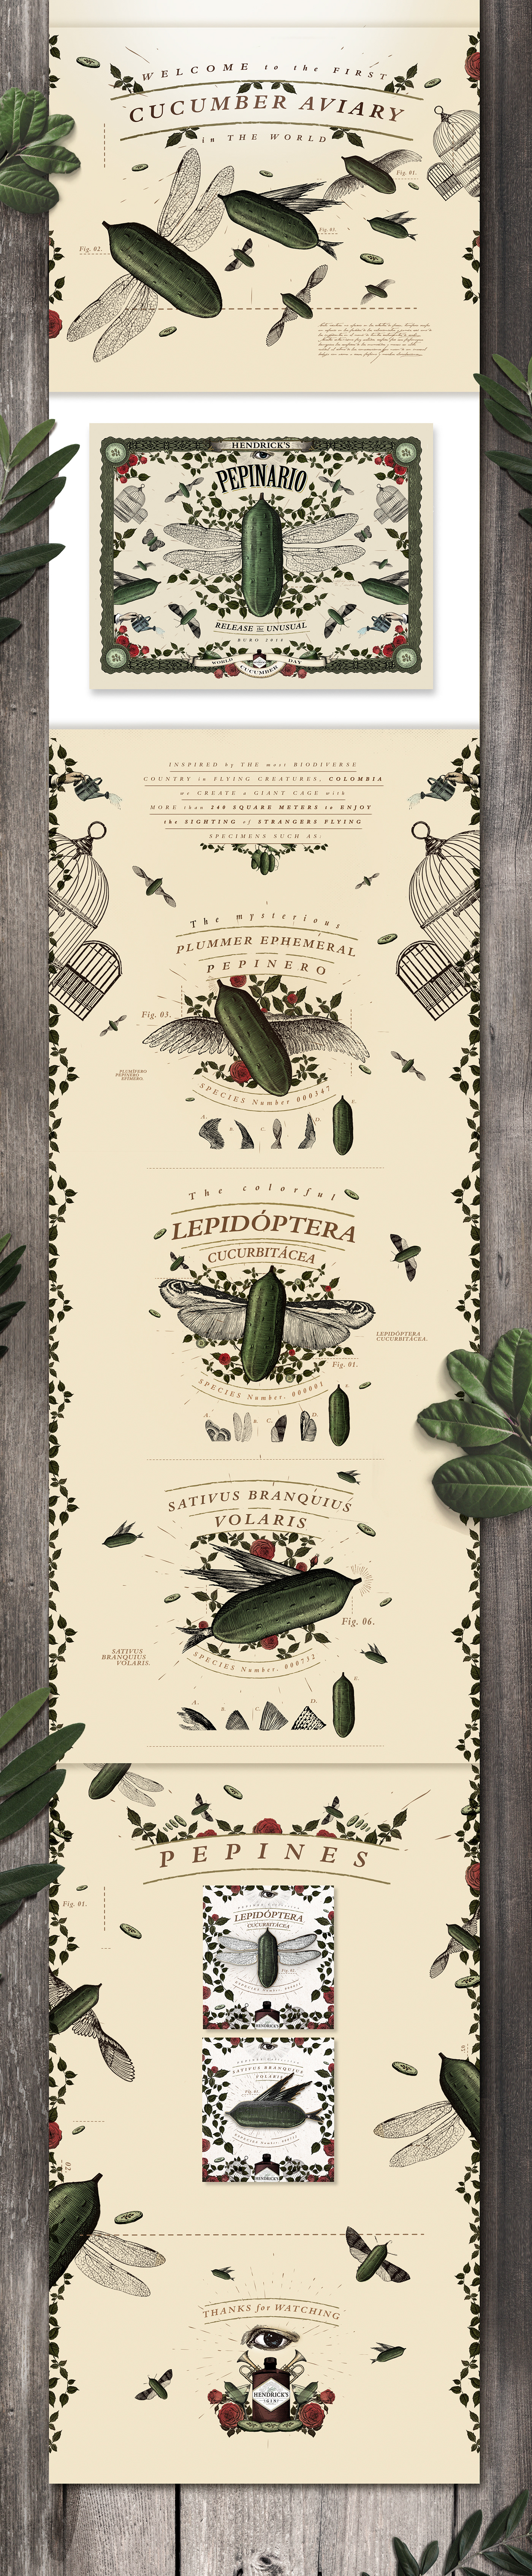 Hendricks gin Aviary Btl Advertising  activation Experience Outdoor Stand colombia